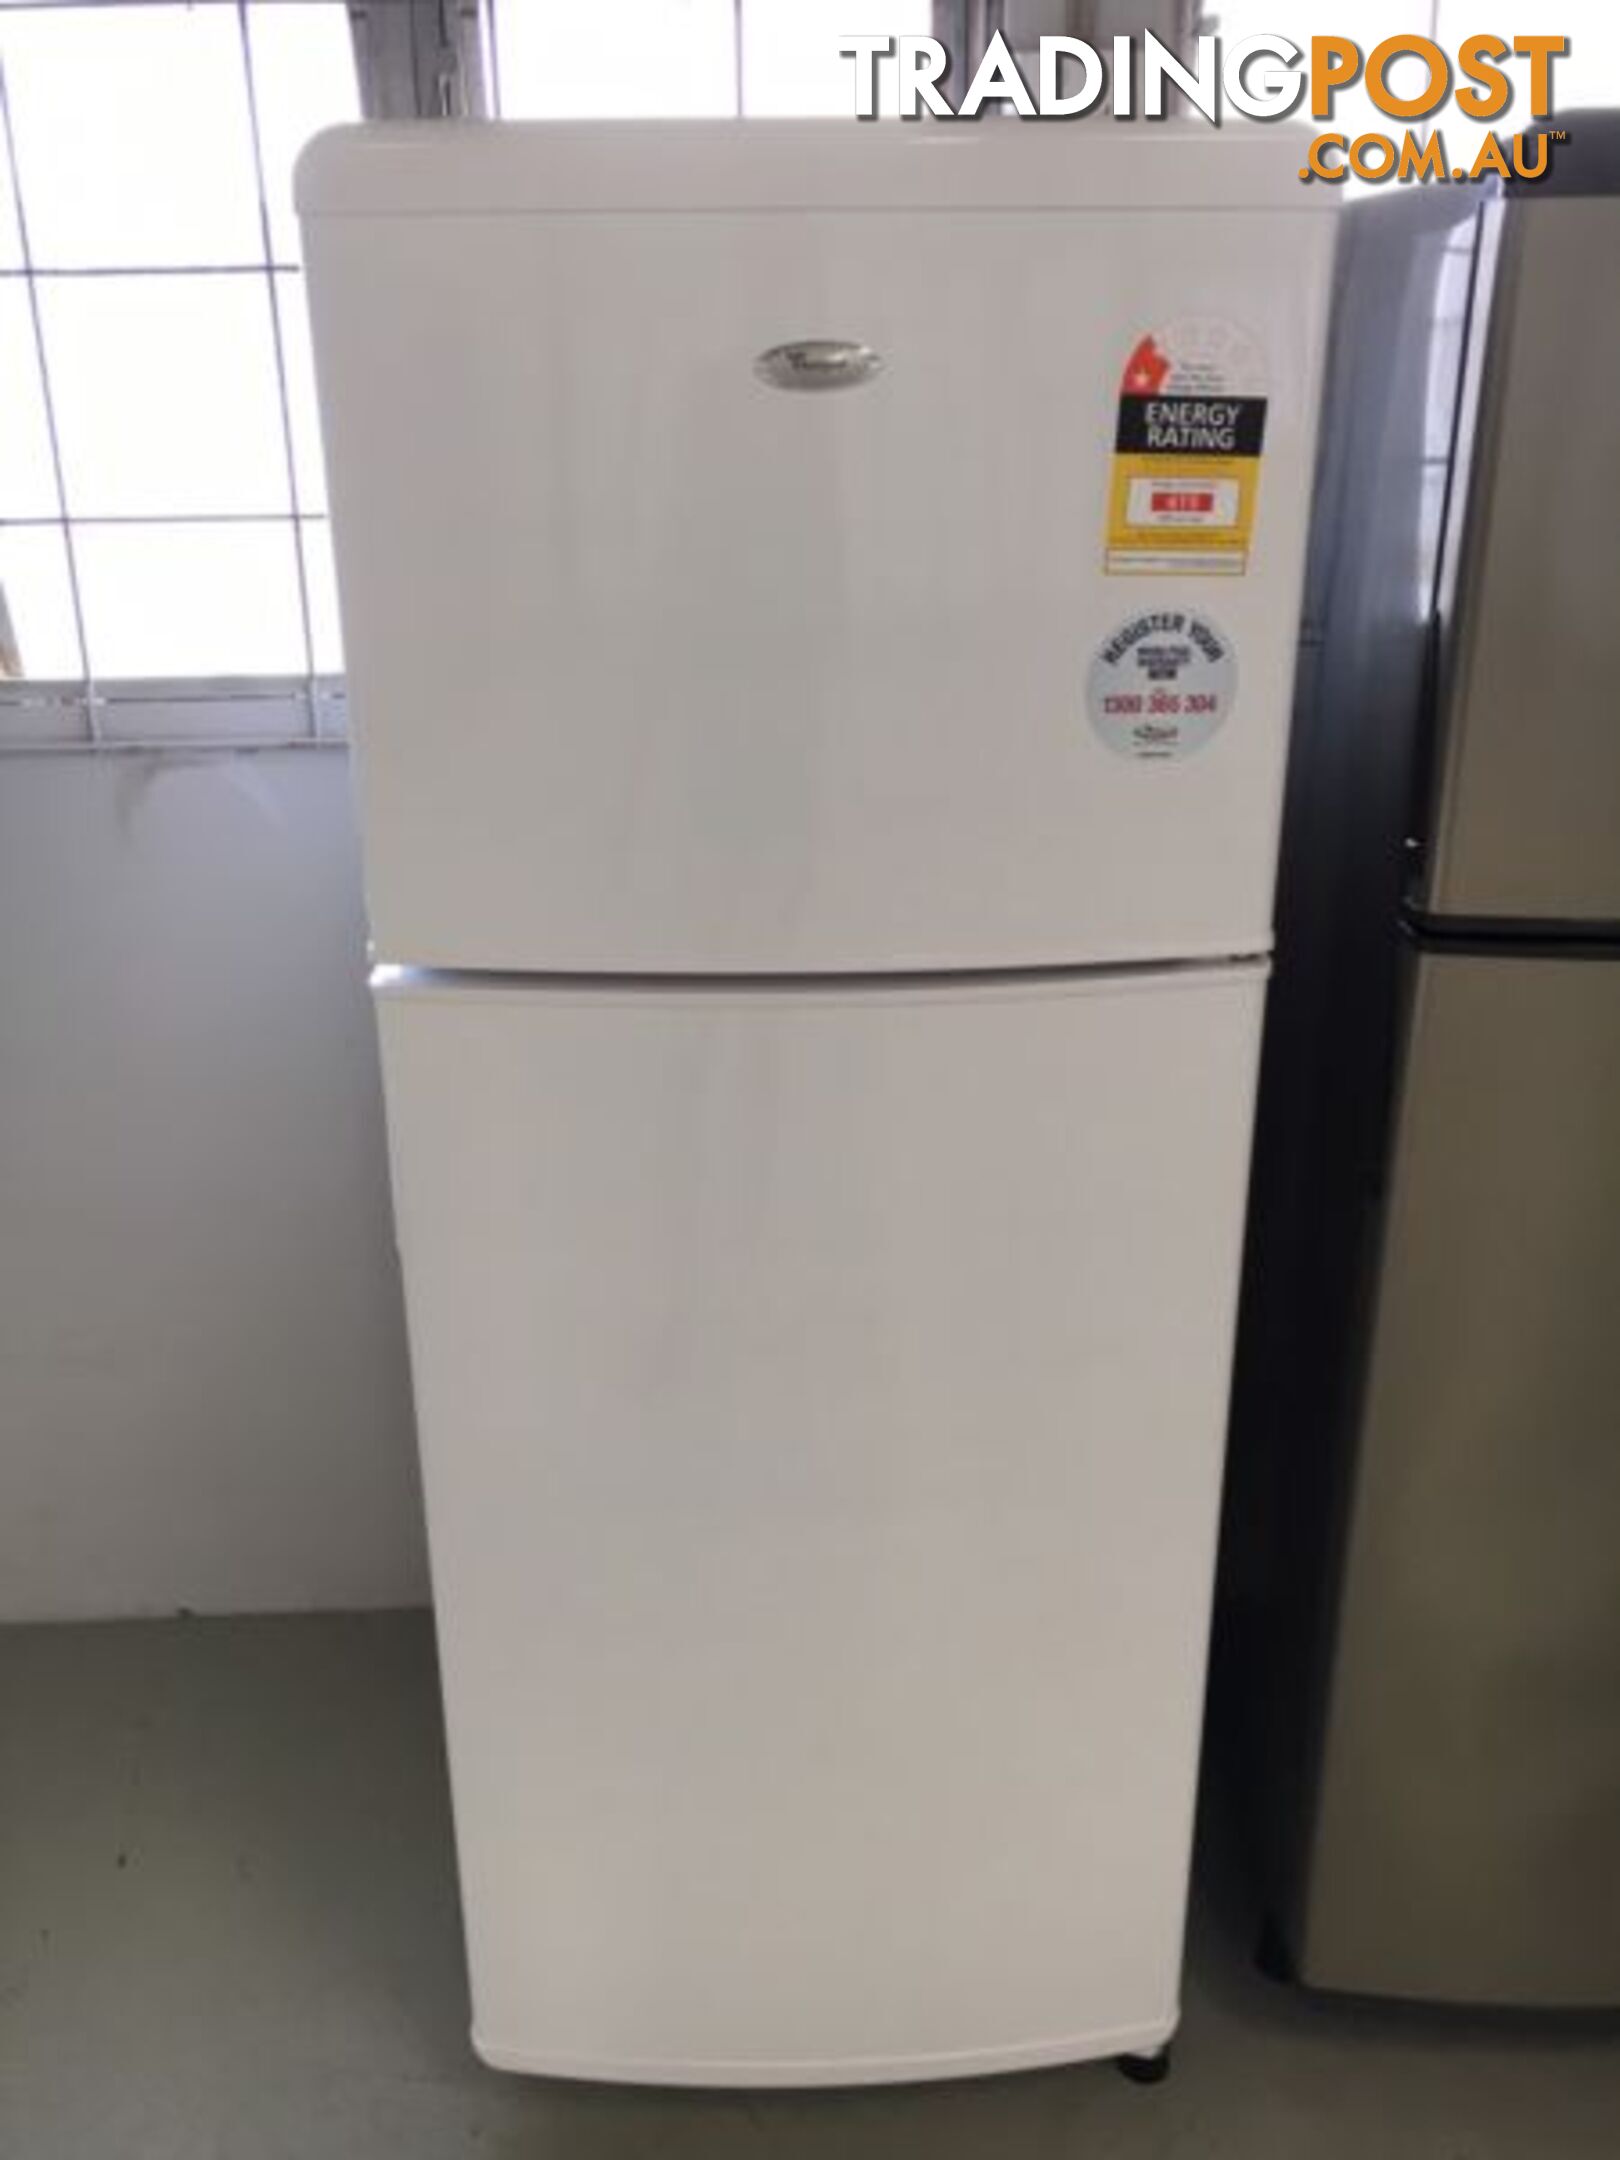 Small size fridges for sale DELIVERY WARRANTY